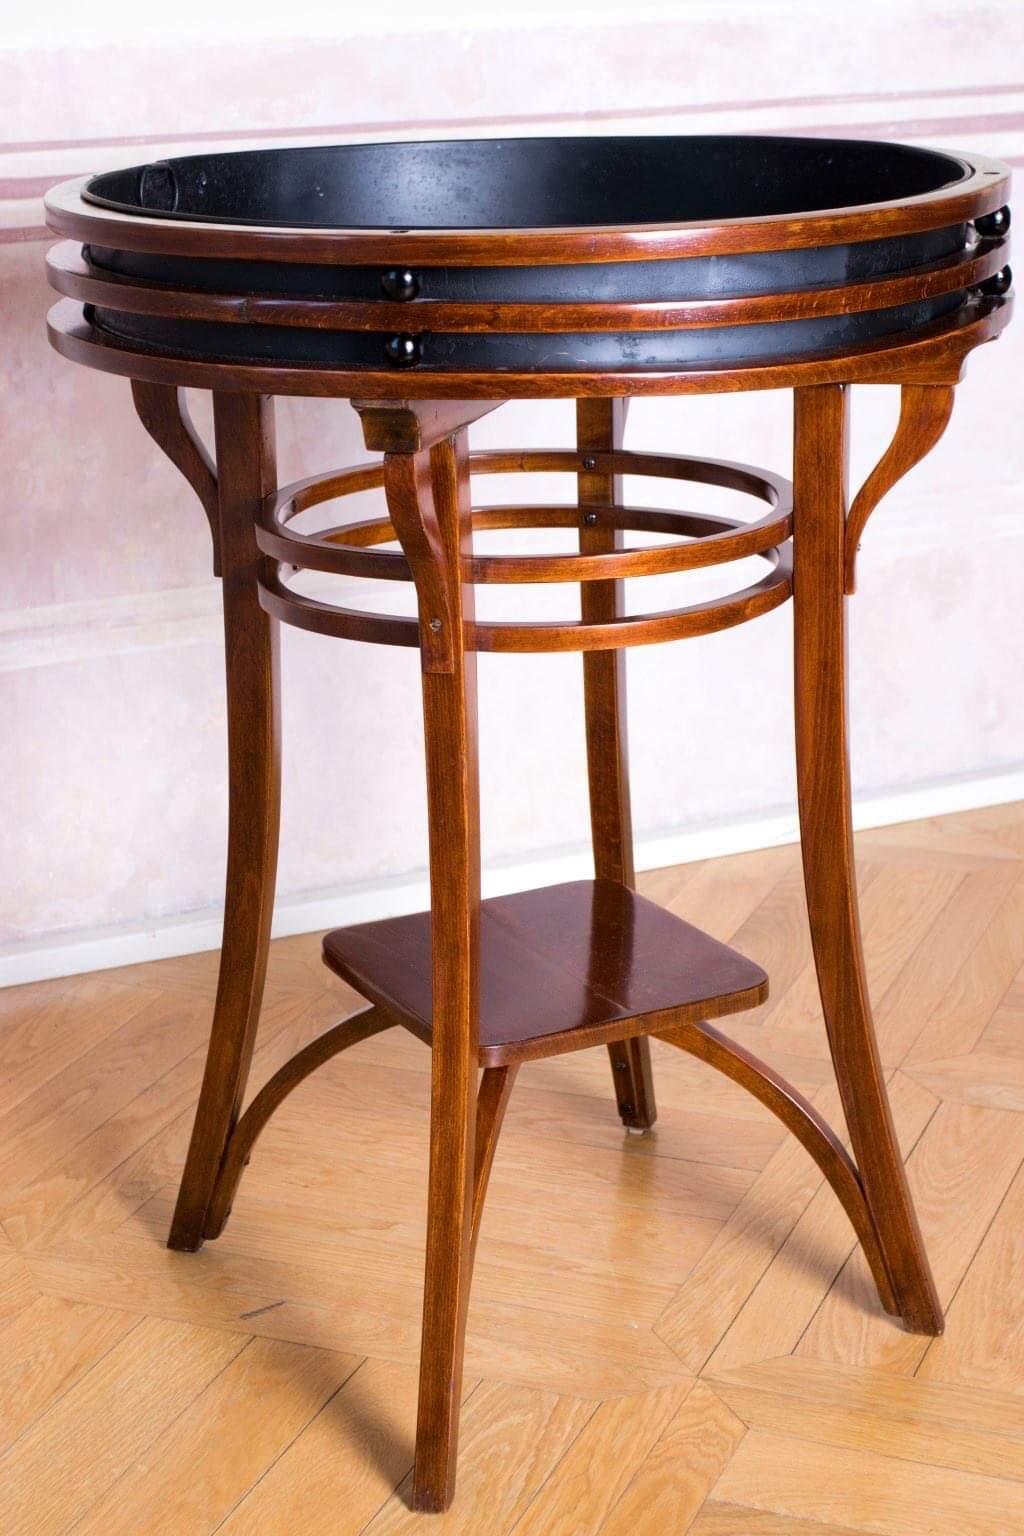 Wien Secession Flowers Holder Table Thonet For Sale 3